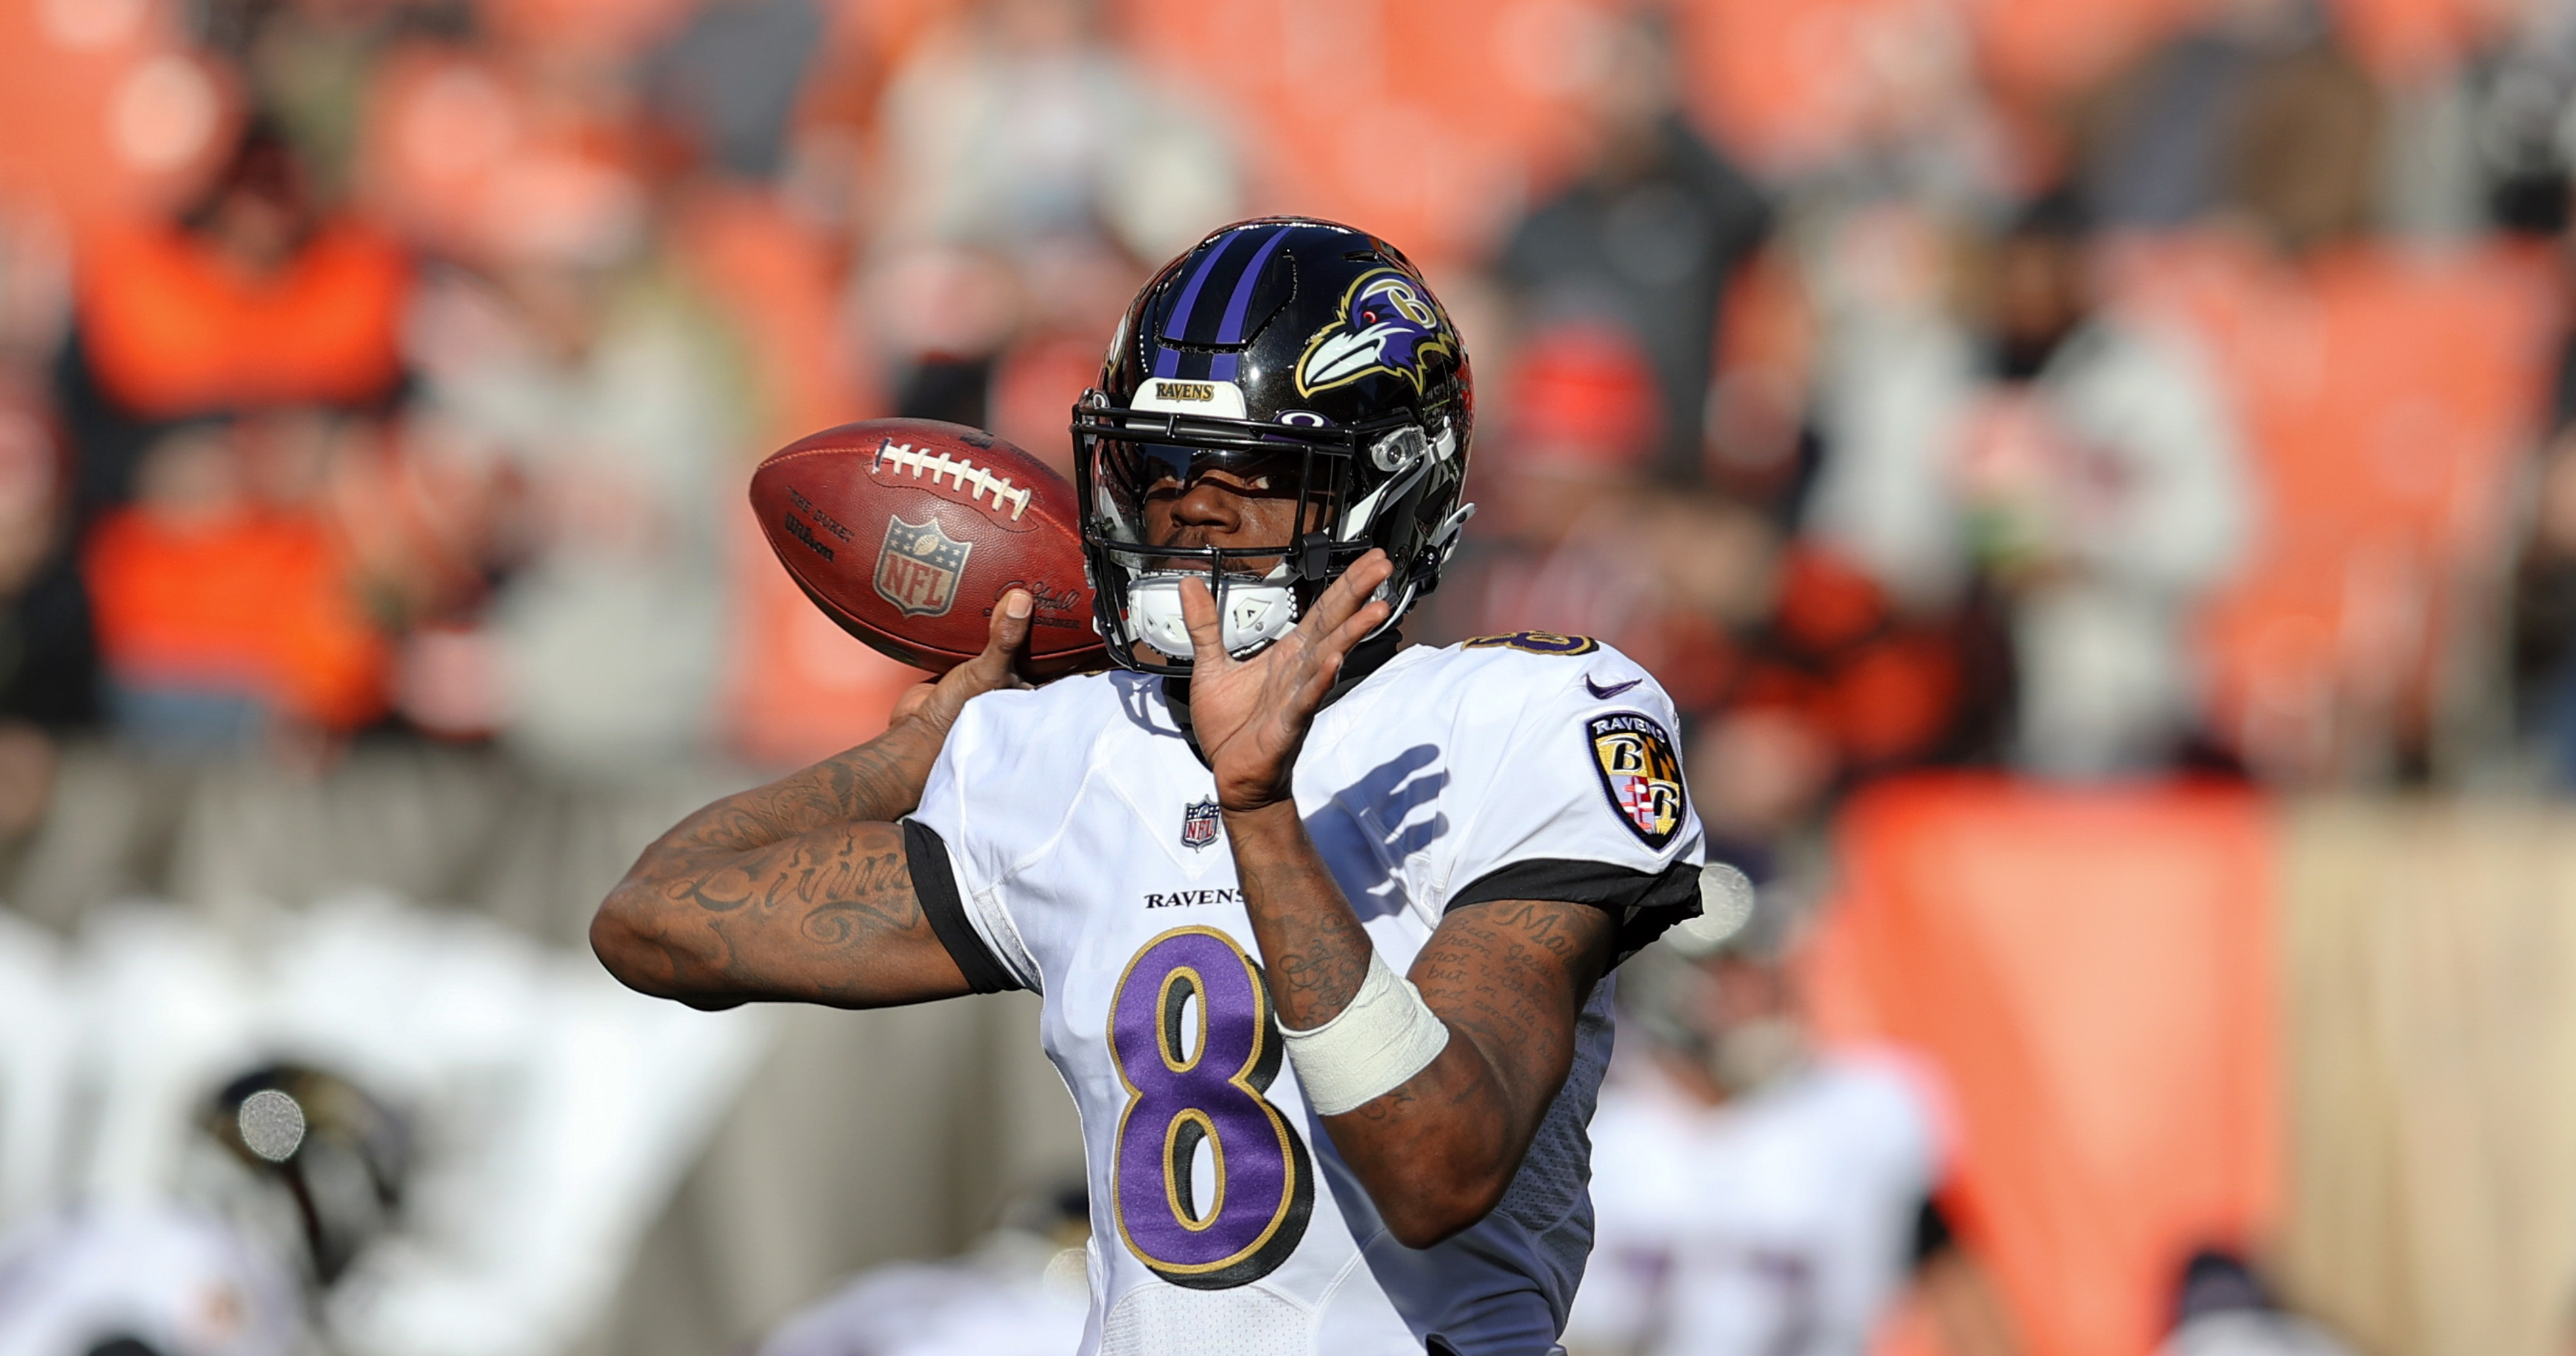 2022 Baltimore Ravens Schedule: Full Listing of Dates, Times and